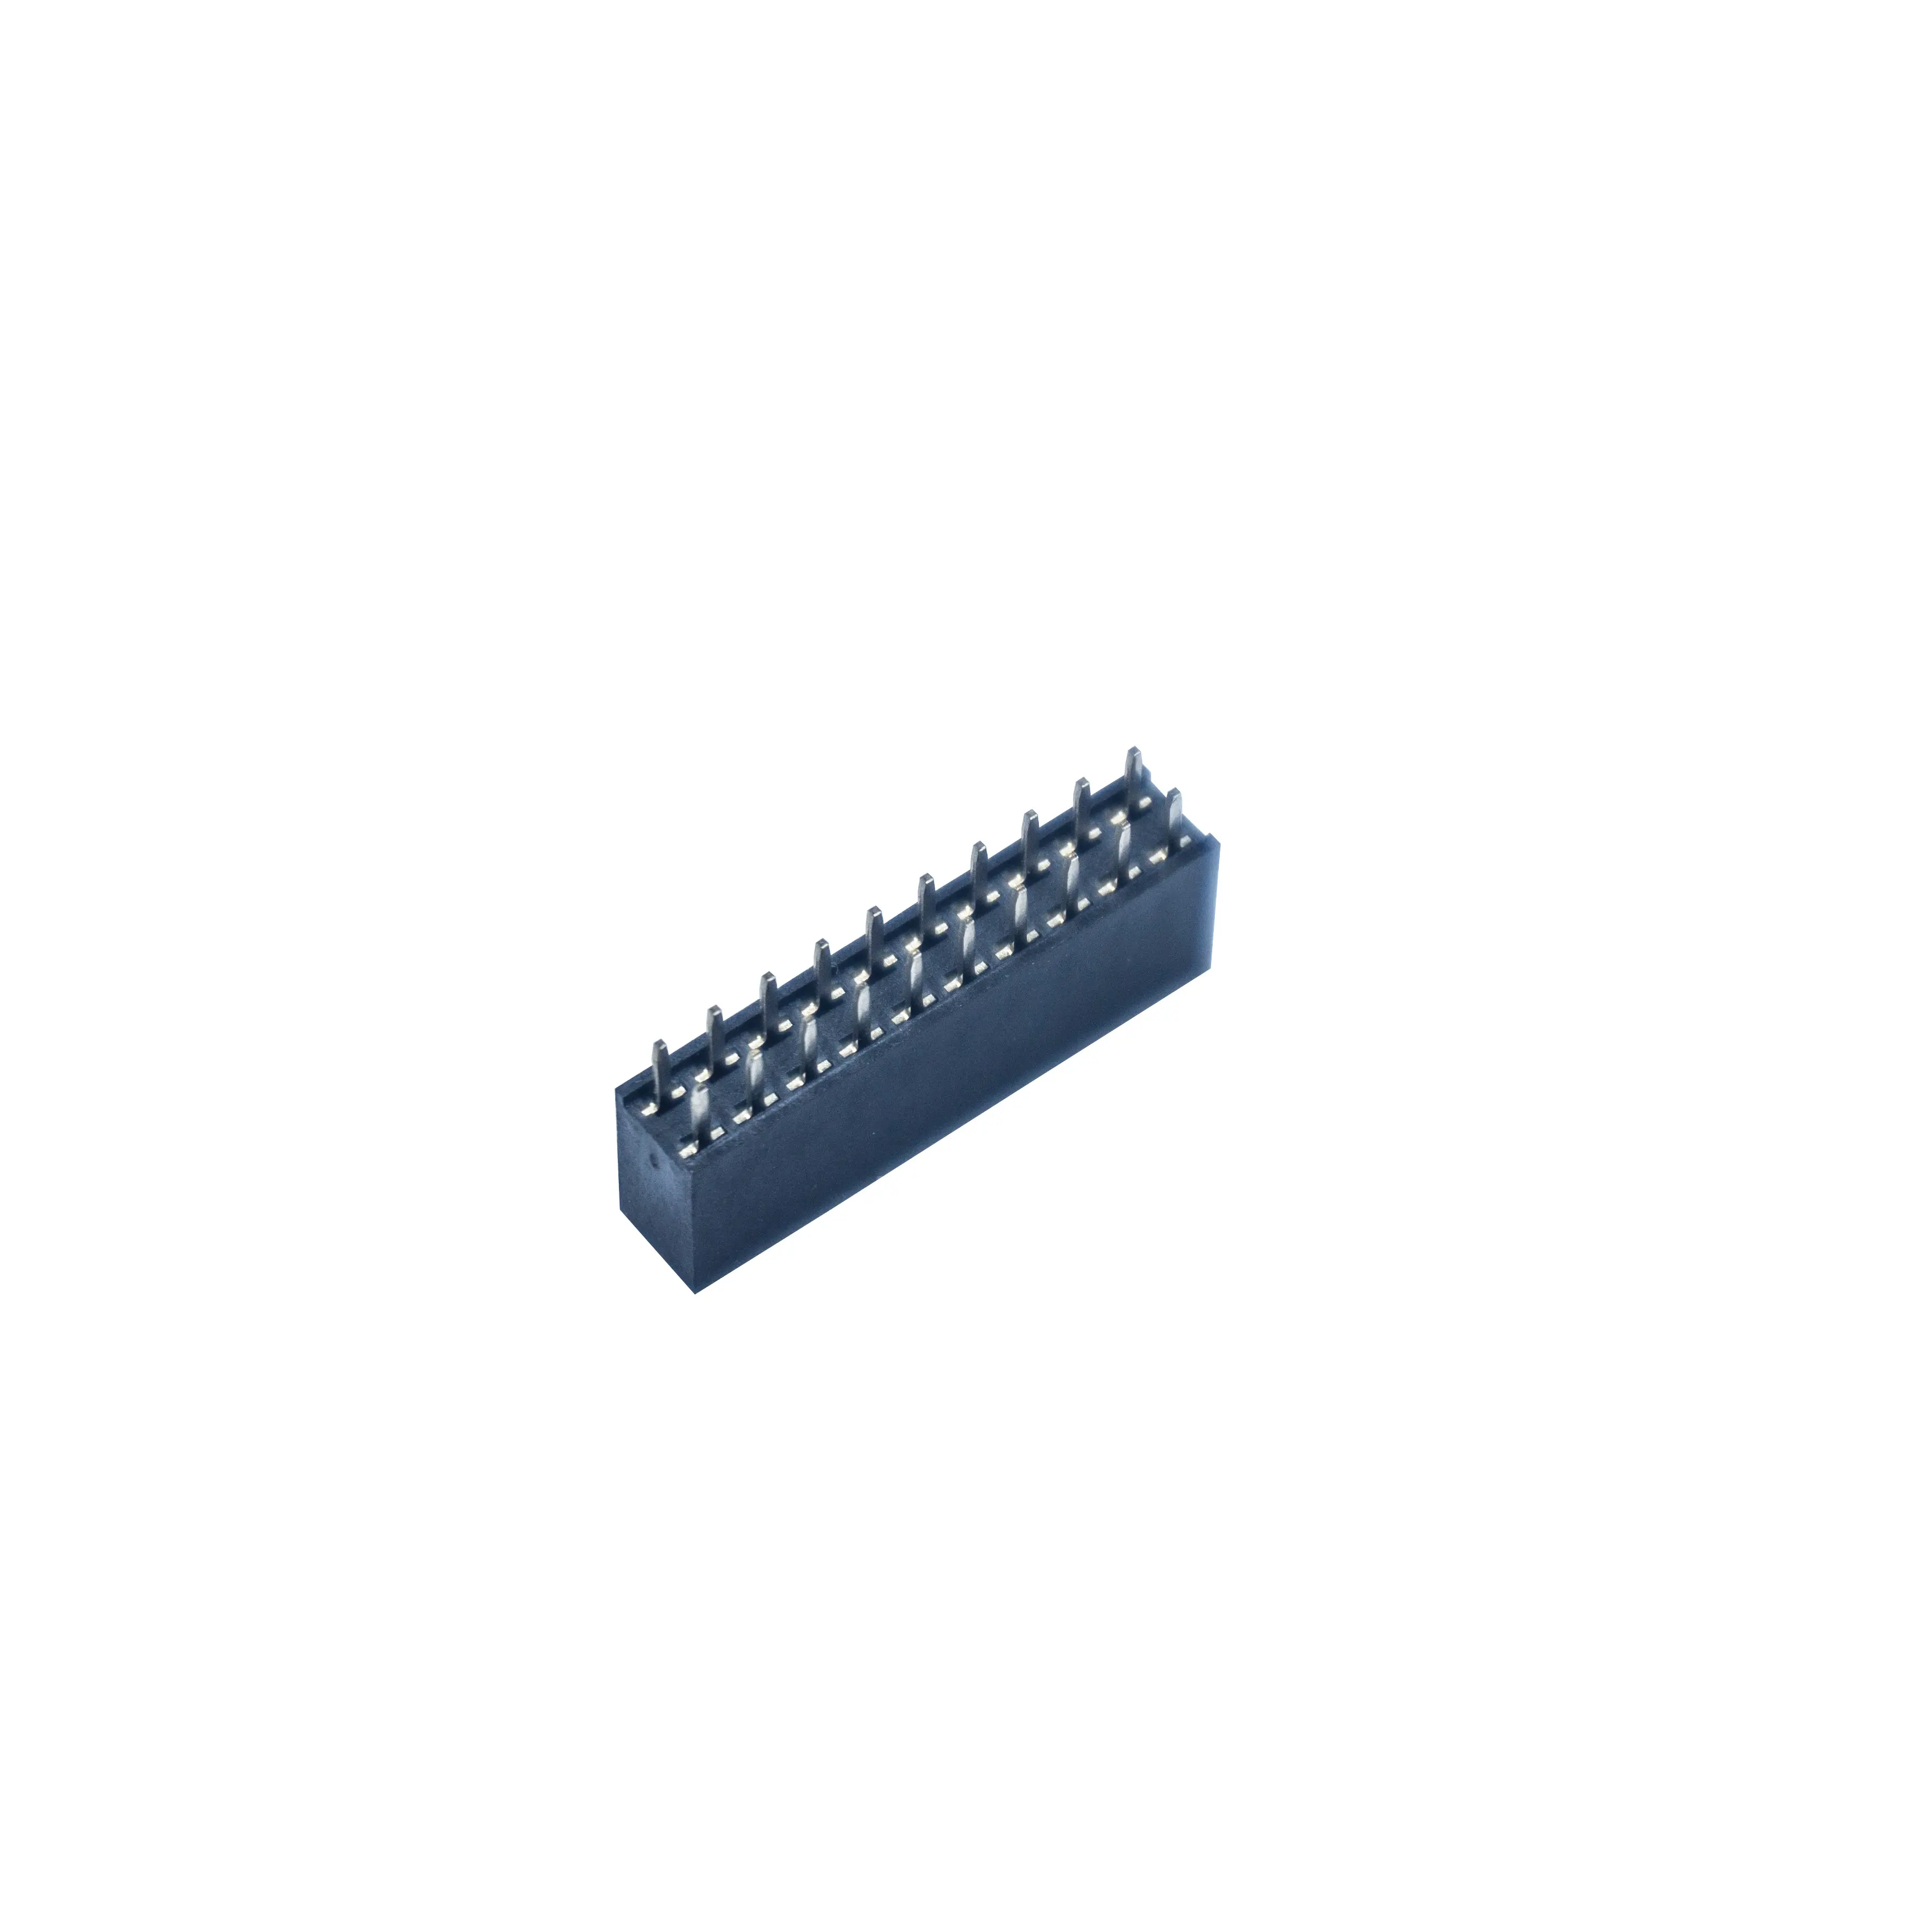 1.0/1.27/2.0/2.54mm pitch Female Header connector 1-50Pin for PCB Board, SMT SMD 90/180 degrees single row double row